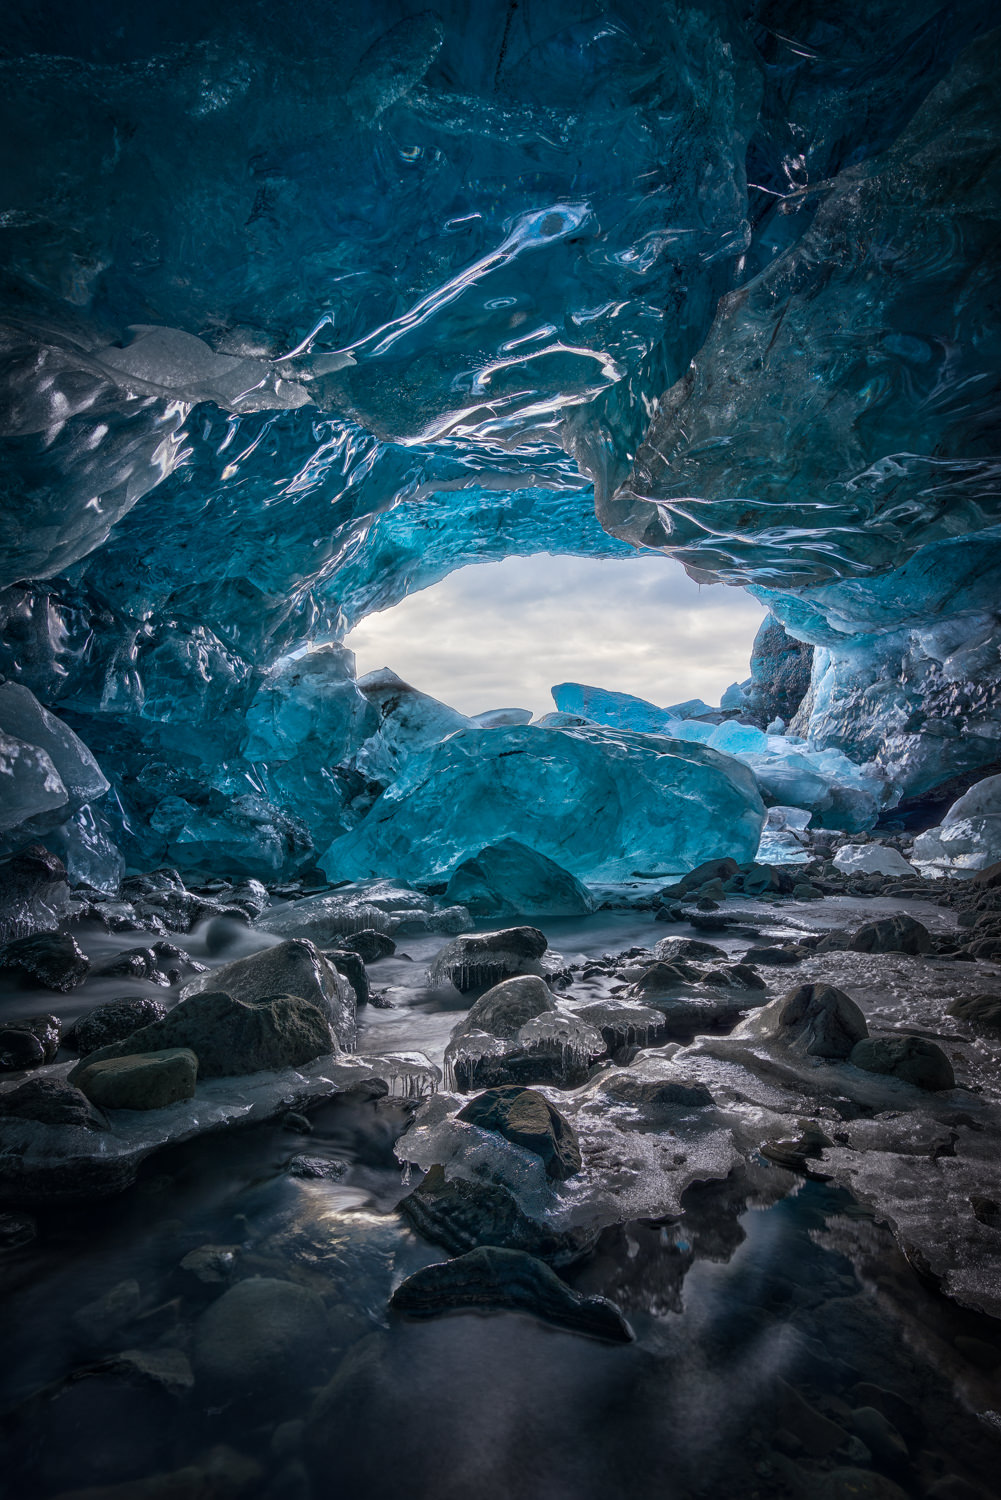 The Inside of an Ice Cave. South Iceland. Taken with a Sony a7R + Sony 16-35 f/4